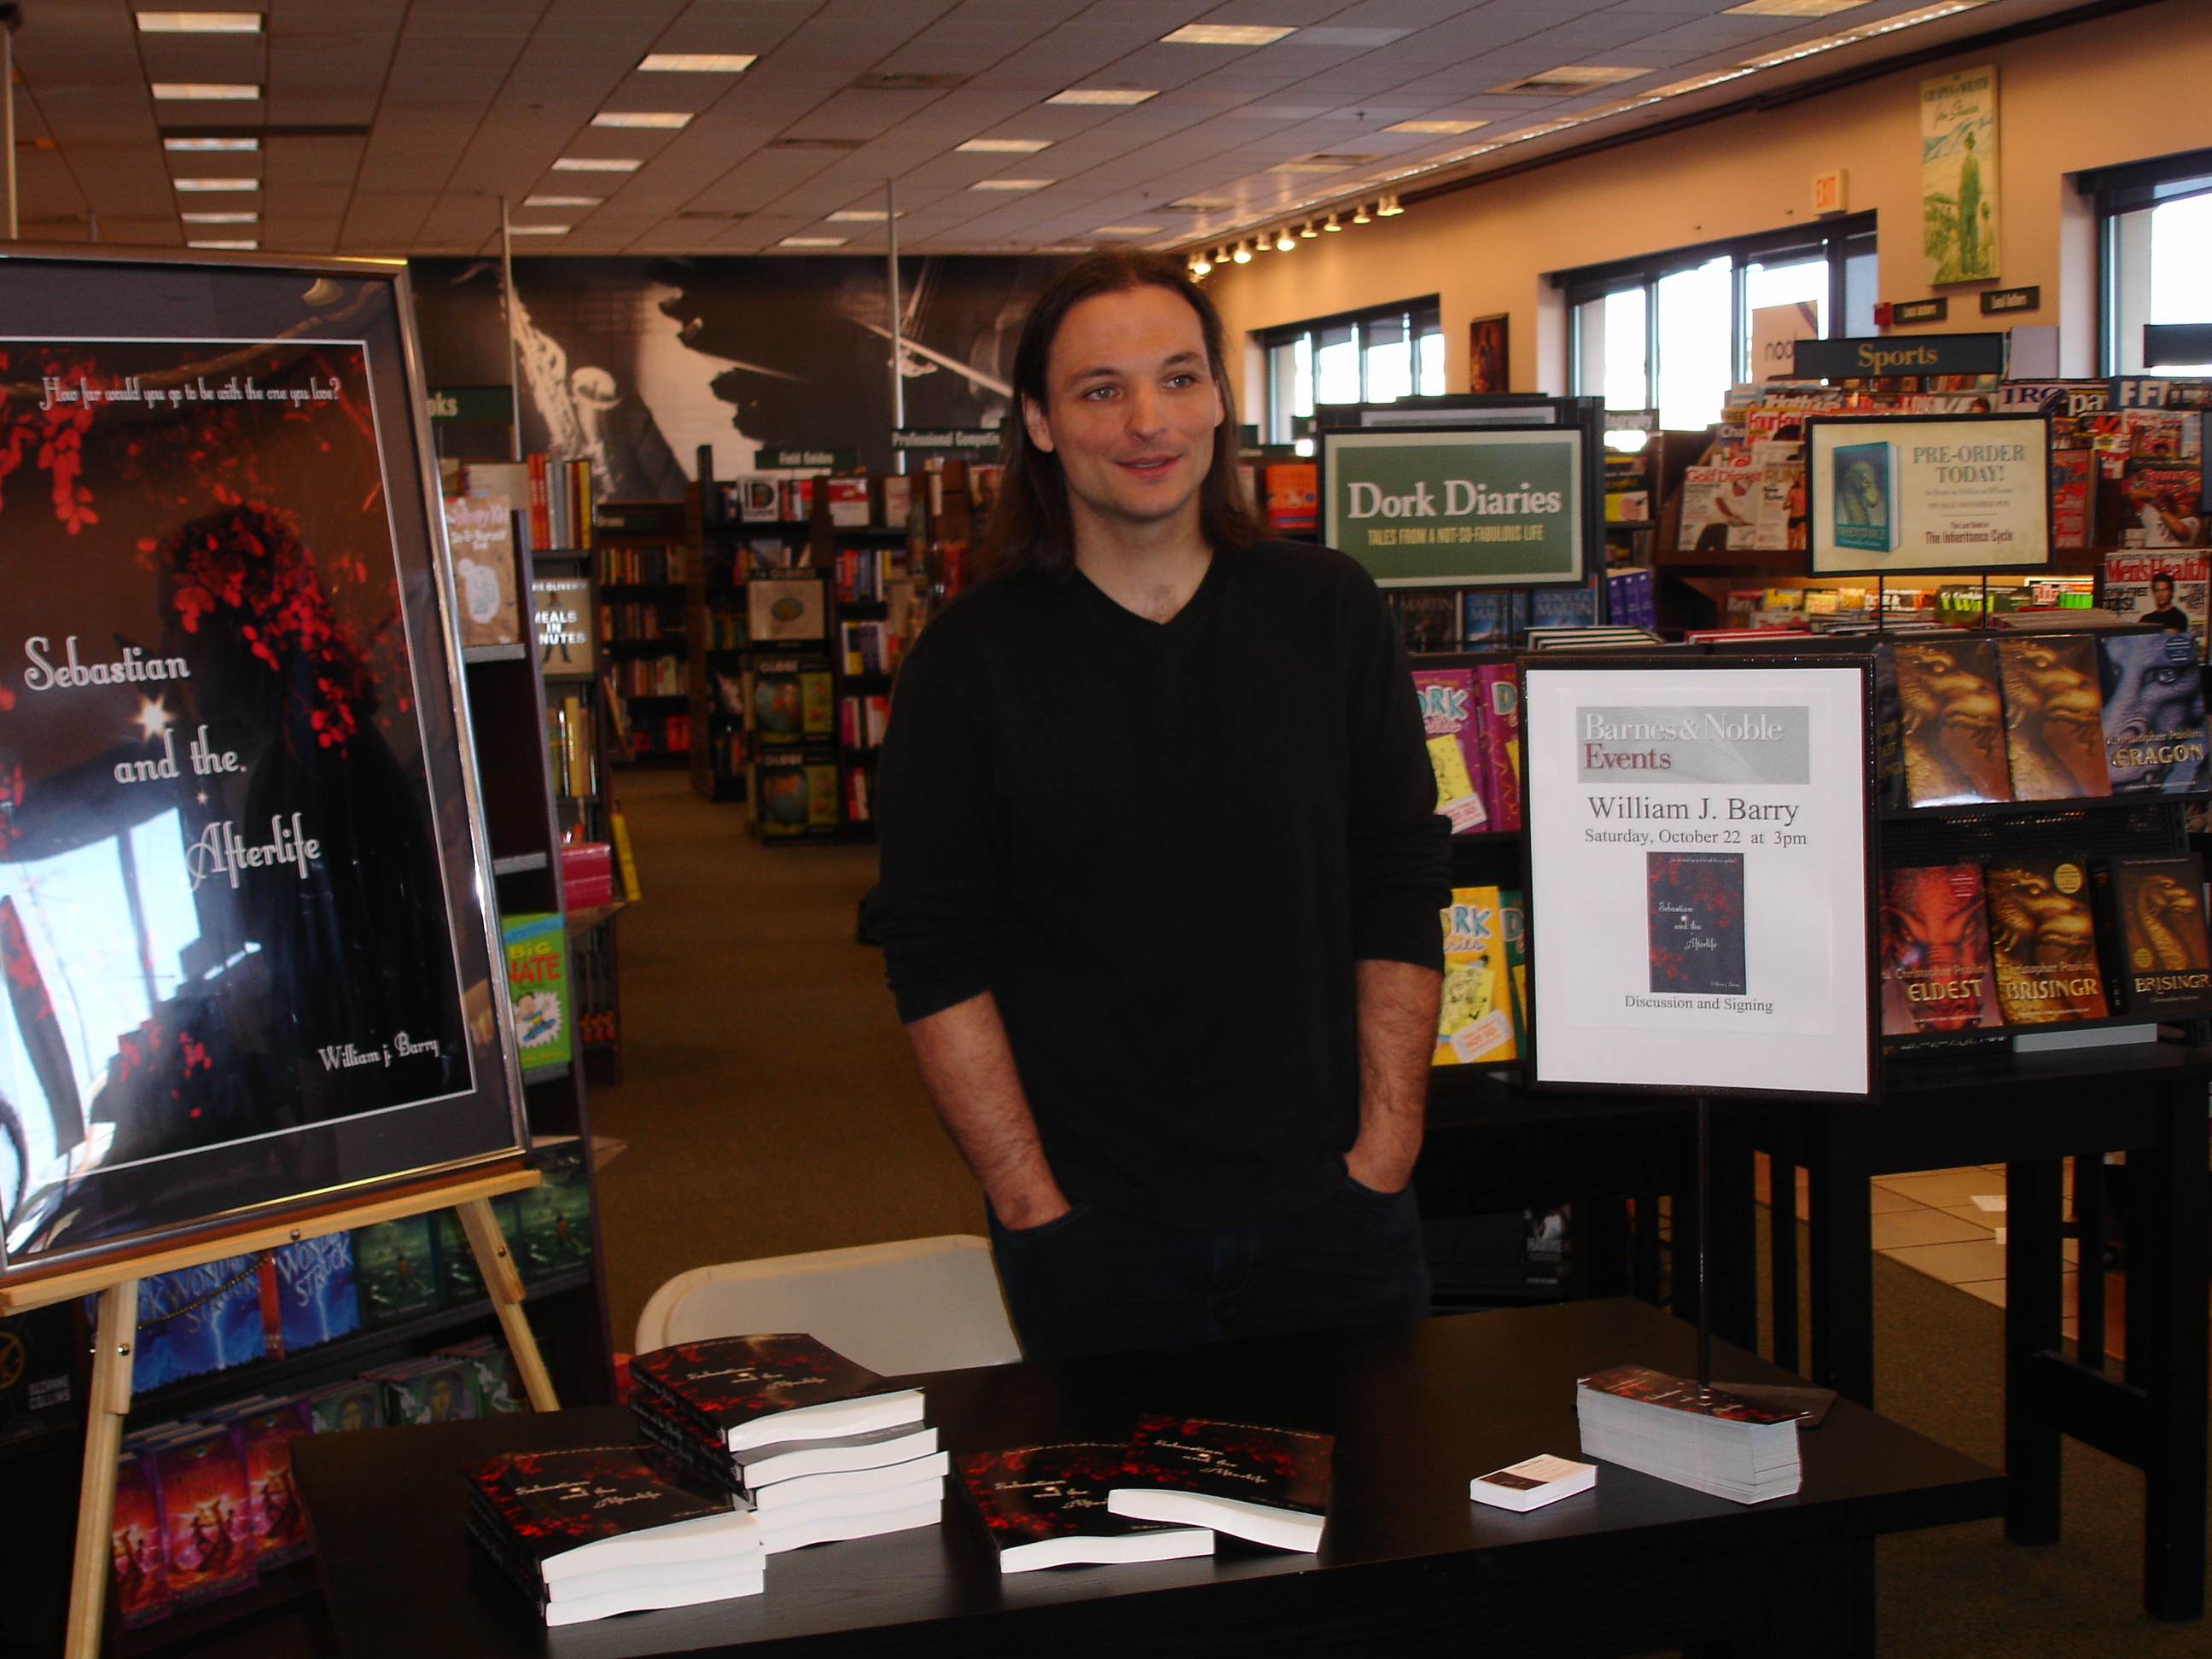 William at one of his book signings at Barnes and Noble